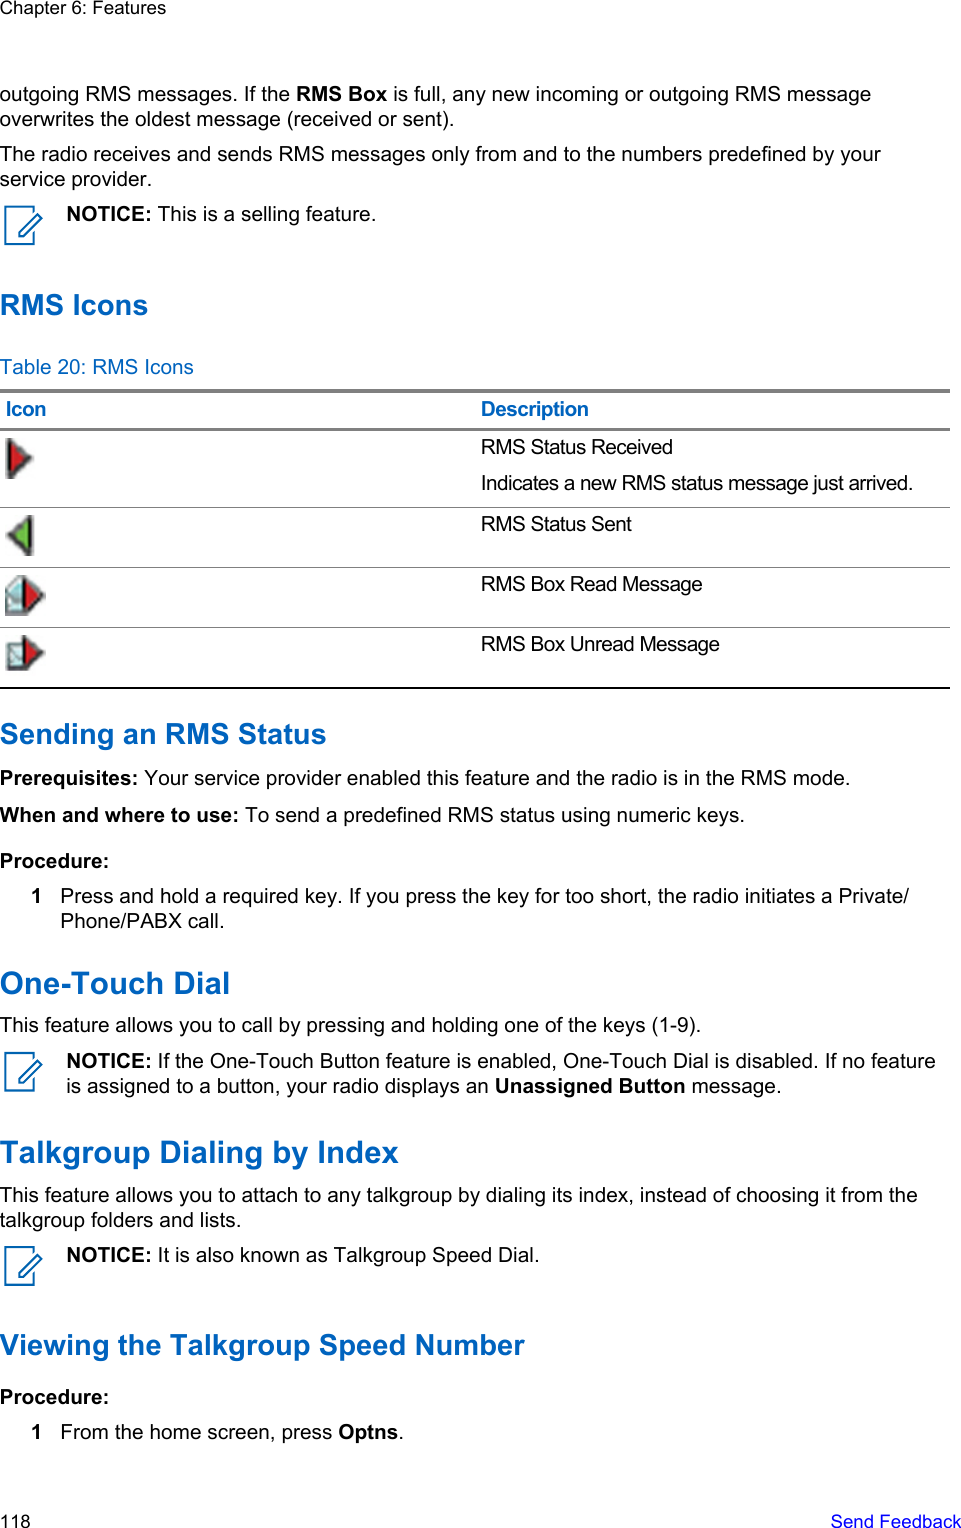 outgoing RMS messages. If the RMS Box is full, any new incoming or outgoing RMS messageoverwrites the oldest message (received or sent).The radio receives and sends RMS messages only from and to the numbers predefined by yourservice provider.NOTICE: This is a selling feature.RMS IconsTable 20: RMS IconsIcon DescriptionRMS Status ReceivedIndicates a new RMS status message just arrived.RMS Status SentRMS Box Read MessageRMS Box Unread MessageSending an RMS StatusPrerequisites: Your service provider enabled this feature and the radio is in the RMS mode.When and where to use: To send a predefined RMS status using numeric keys.Procedure:1Press and hold a required key. If you press the key for too short, the radio initiates a Private/Phone/PABX call.One-Touch DialThis feature allows you to call by pressing and holding one of the keys (1-9).NOTICE: If the One-Touch Button feature is enabled, One-Touch Dial is disabled. If no featureis assigned to a button, your radio displays an Unassigned Button message.Talkgroup Dialing by IndexThis feature allows you to attach to any talkgroup by dialing its index, instead of choosing it from thetalkgroup folders and lists.NOTICE: It is also known as Talkgroup Speed Dial.Viewing the Talkgroup Speed NumberProcedure:1From the home screen, press Optns.Chapter 6: Features118   Send Feedback